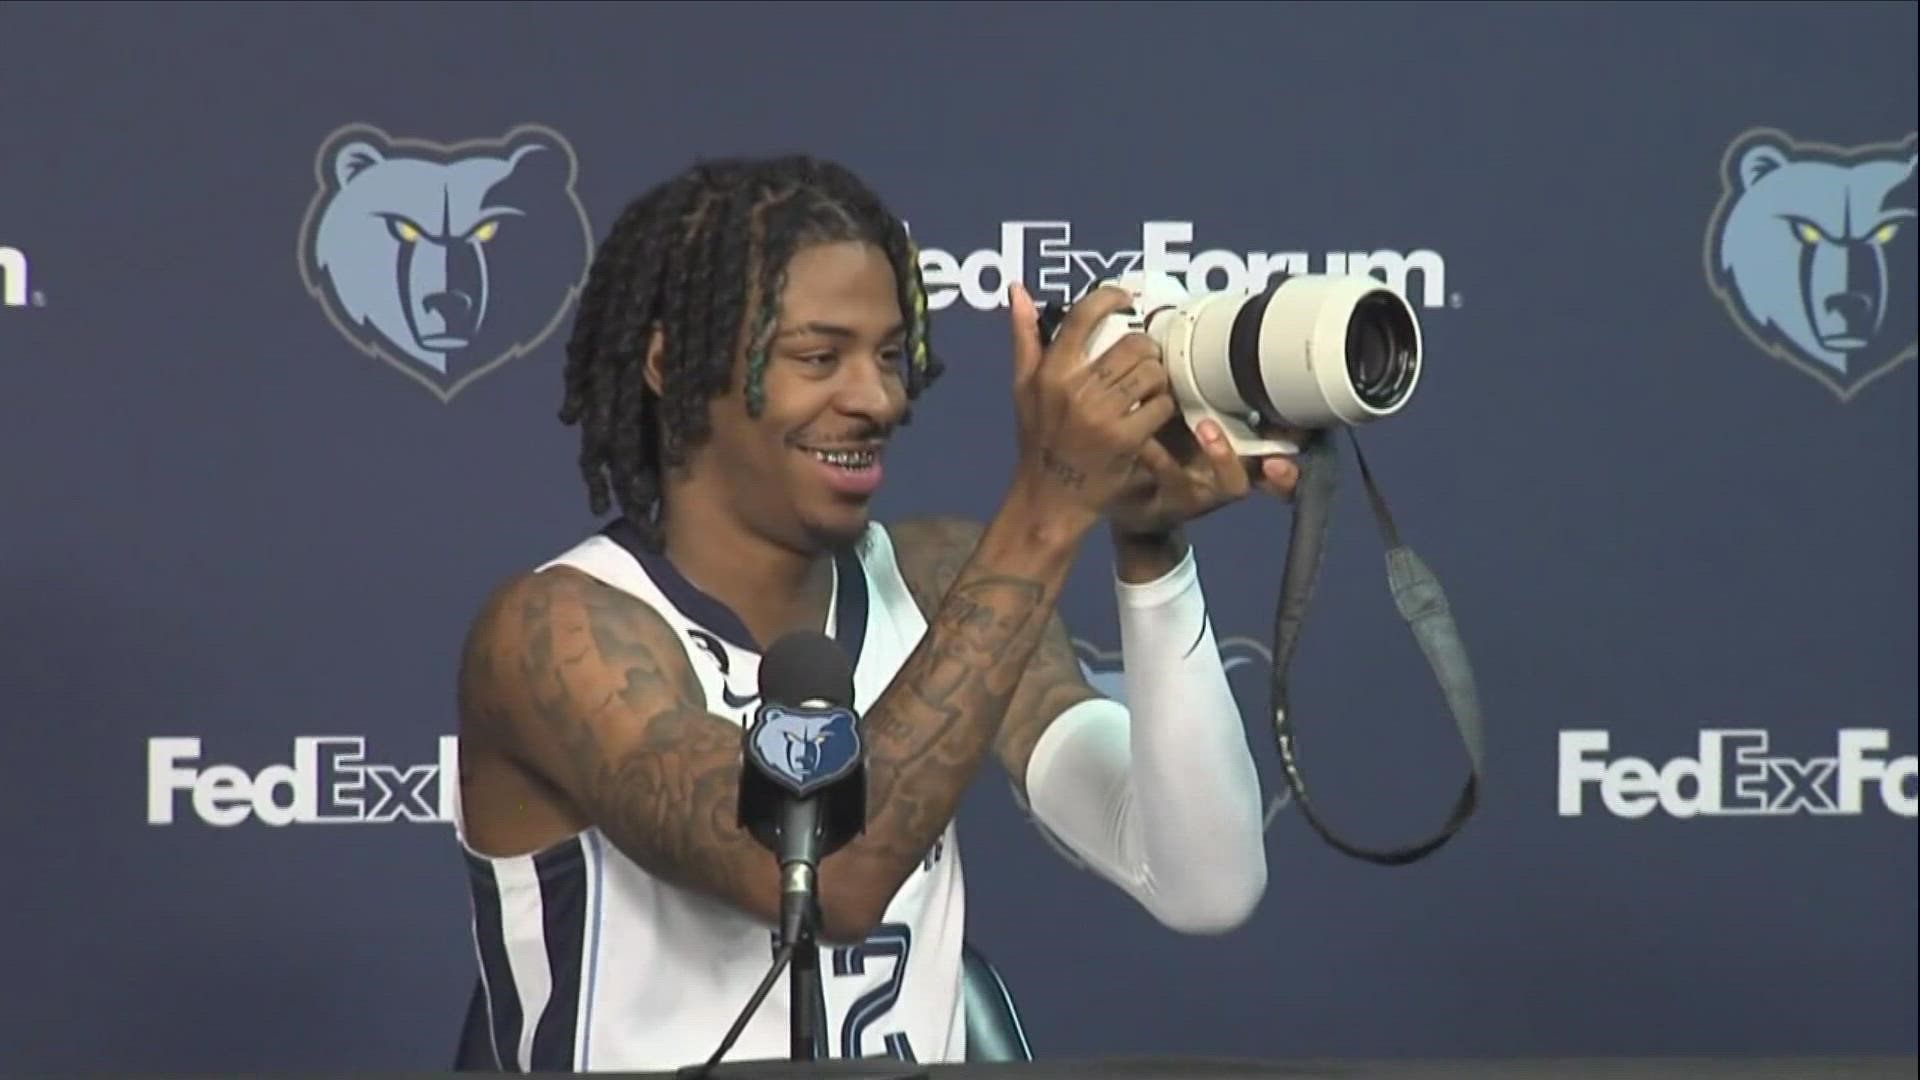 Grizzlies superstar Ja Morant speaks with the media during Memphis Grizzlies Media Day 2022, showcasing his camera skills to boot.